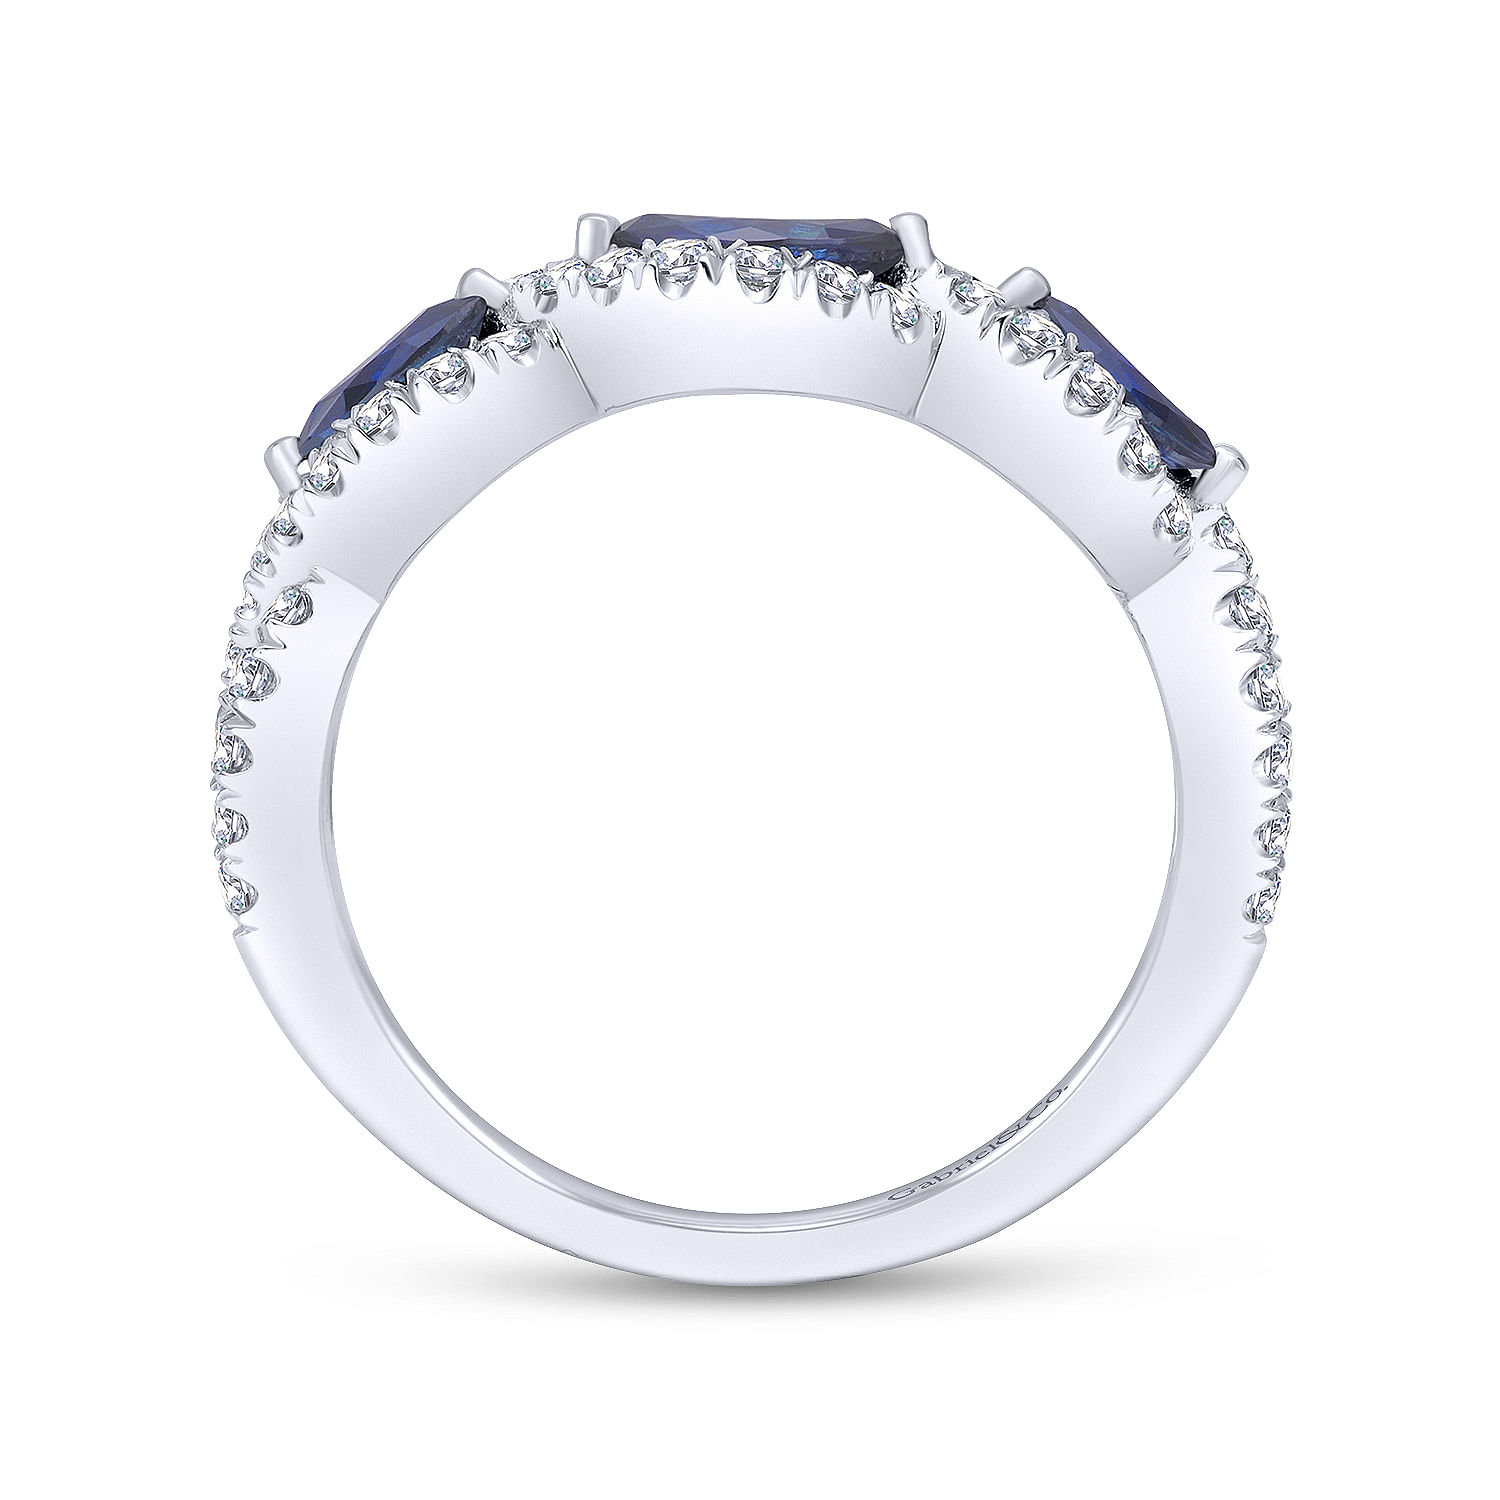 14K White Gold Twisted Diamond Rows and Sapphire Marquise Stones Ring